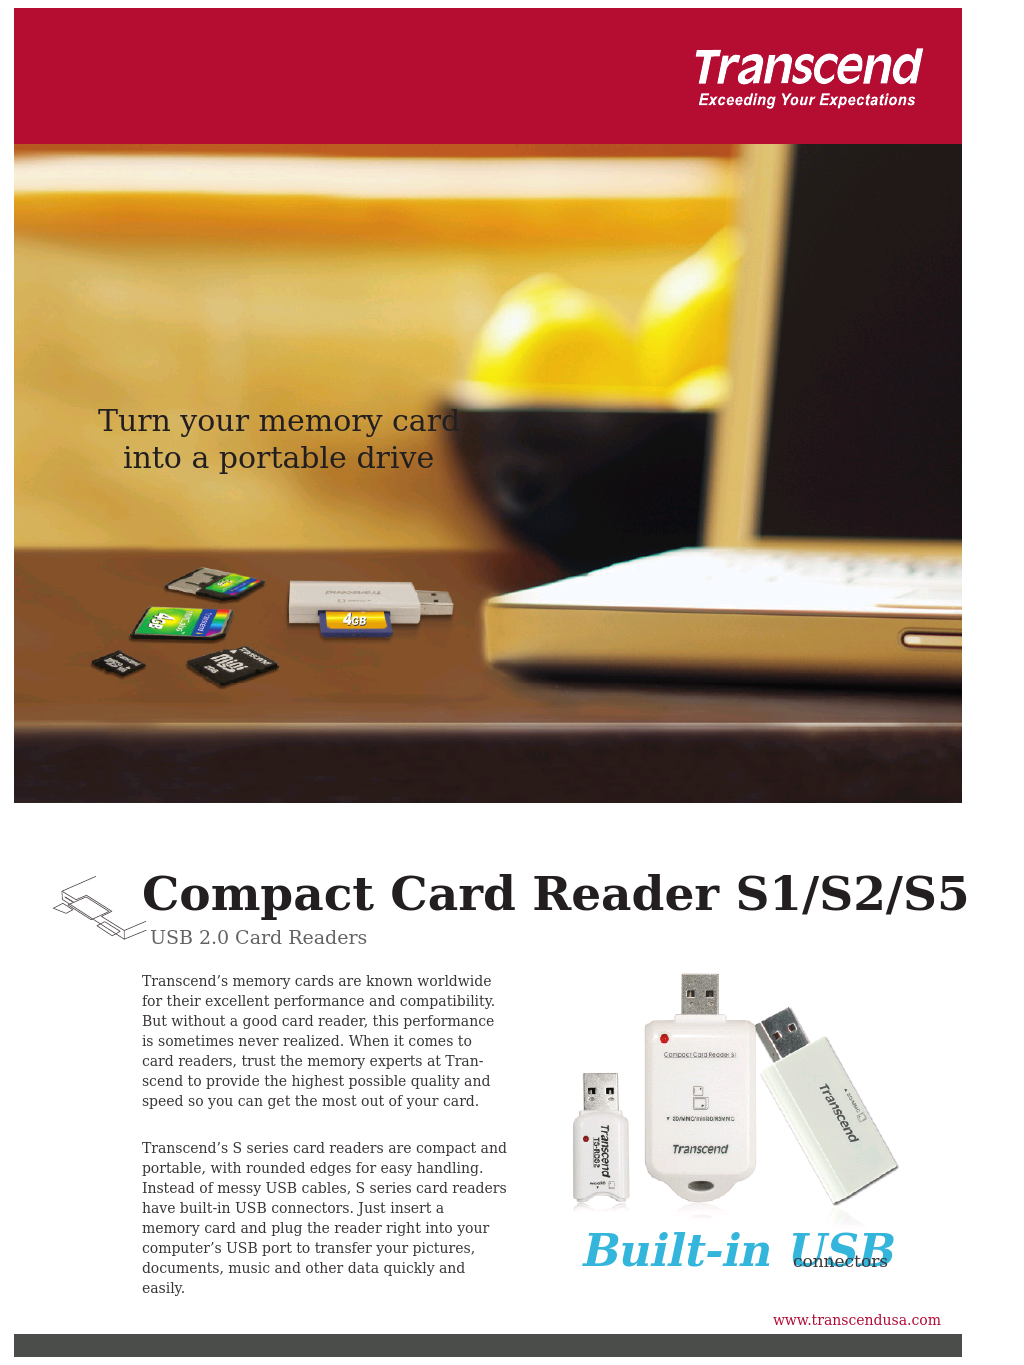 Compact Card Reader S1